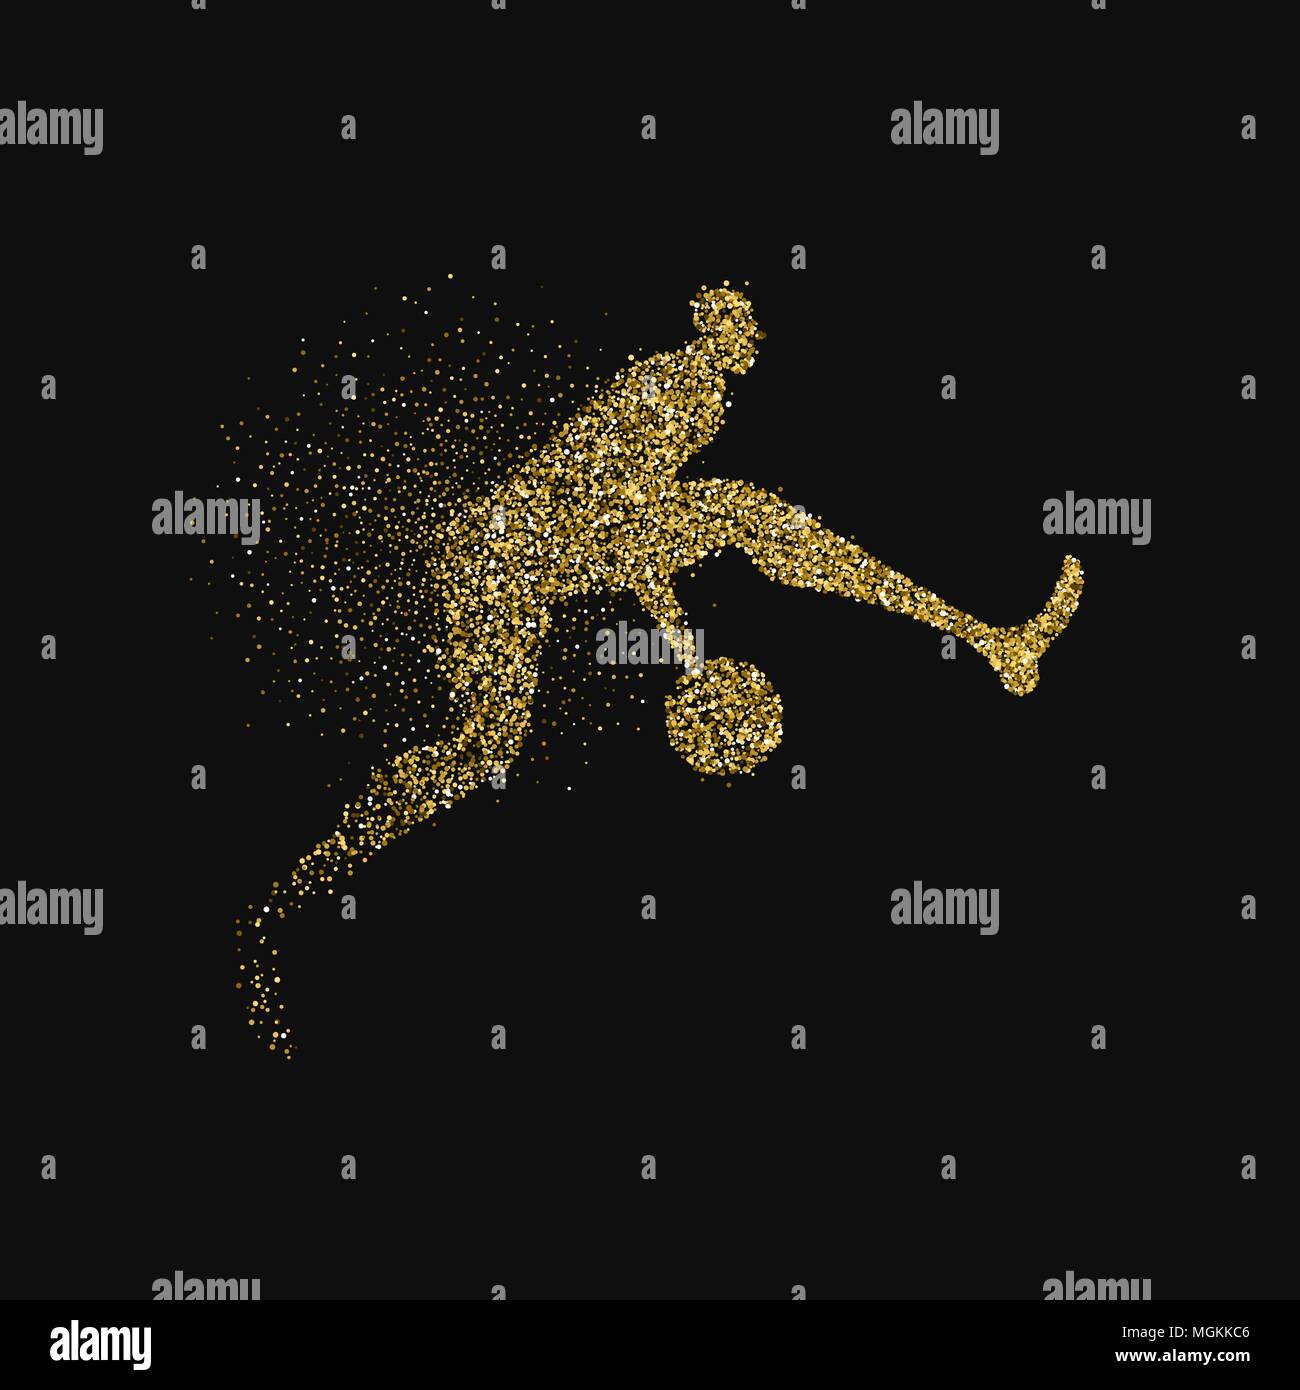 Basketball player silhouette made of gold glitter splash isolated over black background. Golden color athlete man jumping with basket ball. EPS10 vect Stock Vector